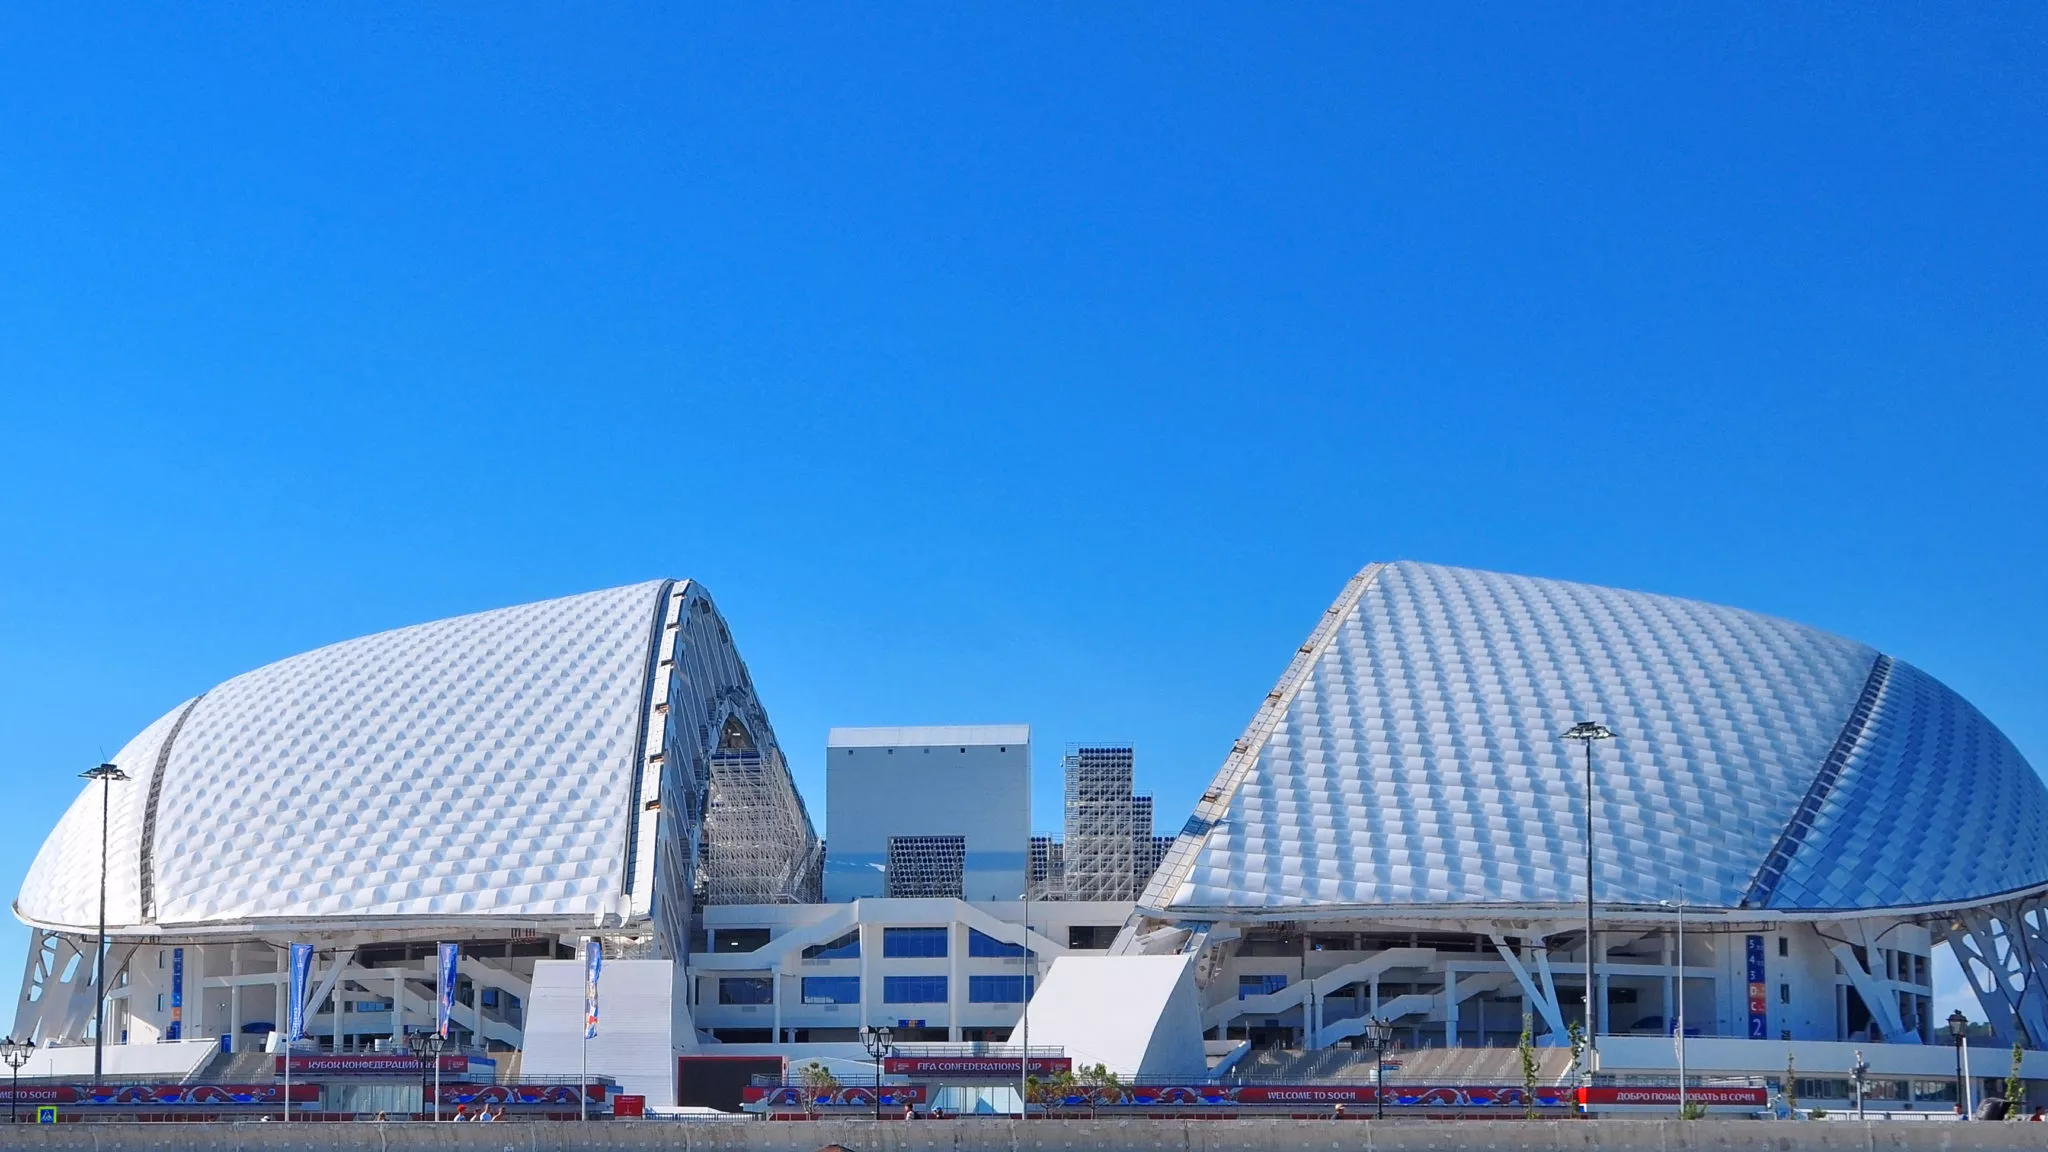 Fisht Olympic Stadium in Russia, Europe | Football - Rated 4.3